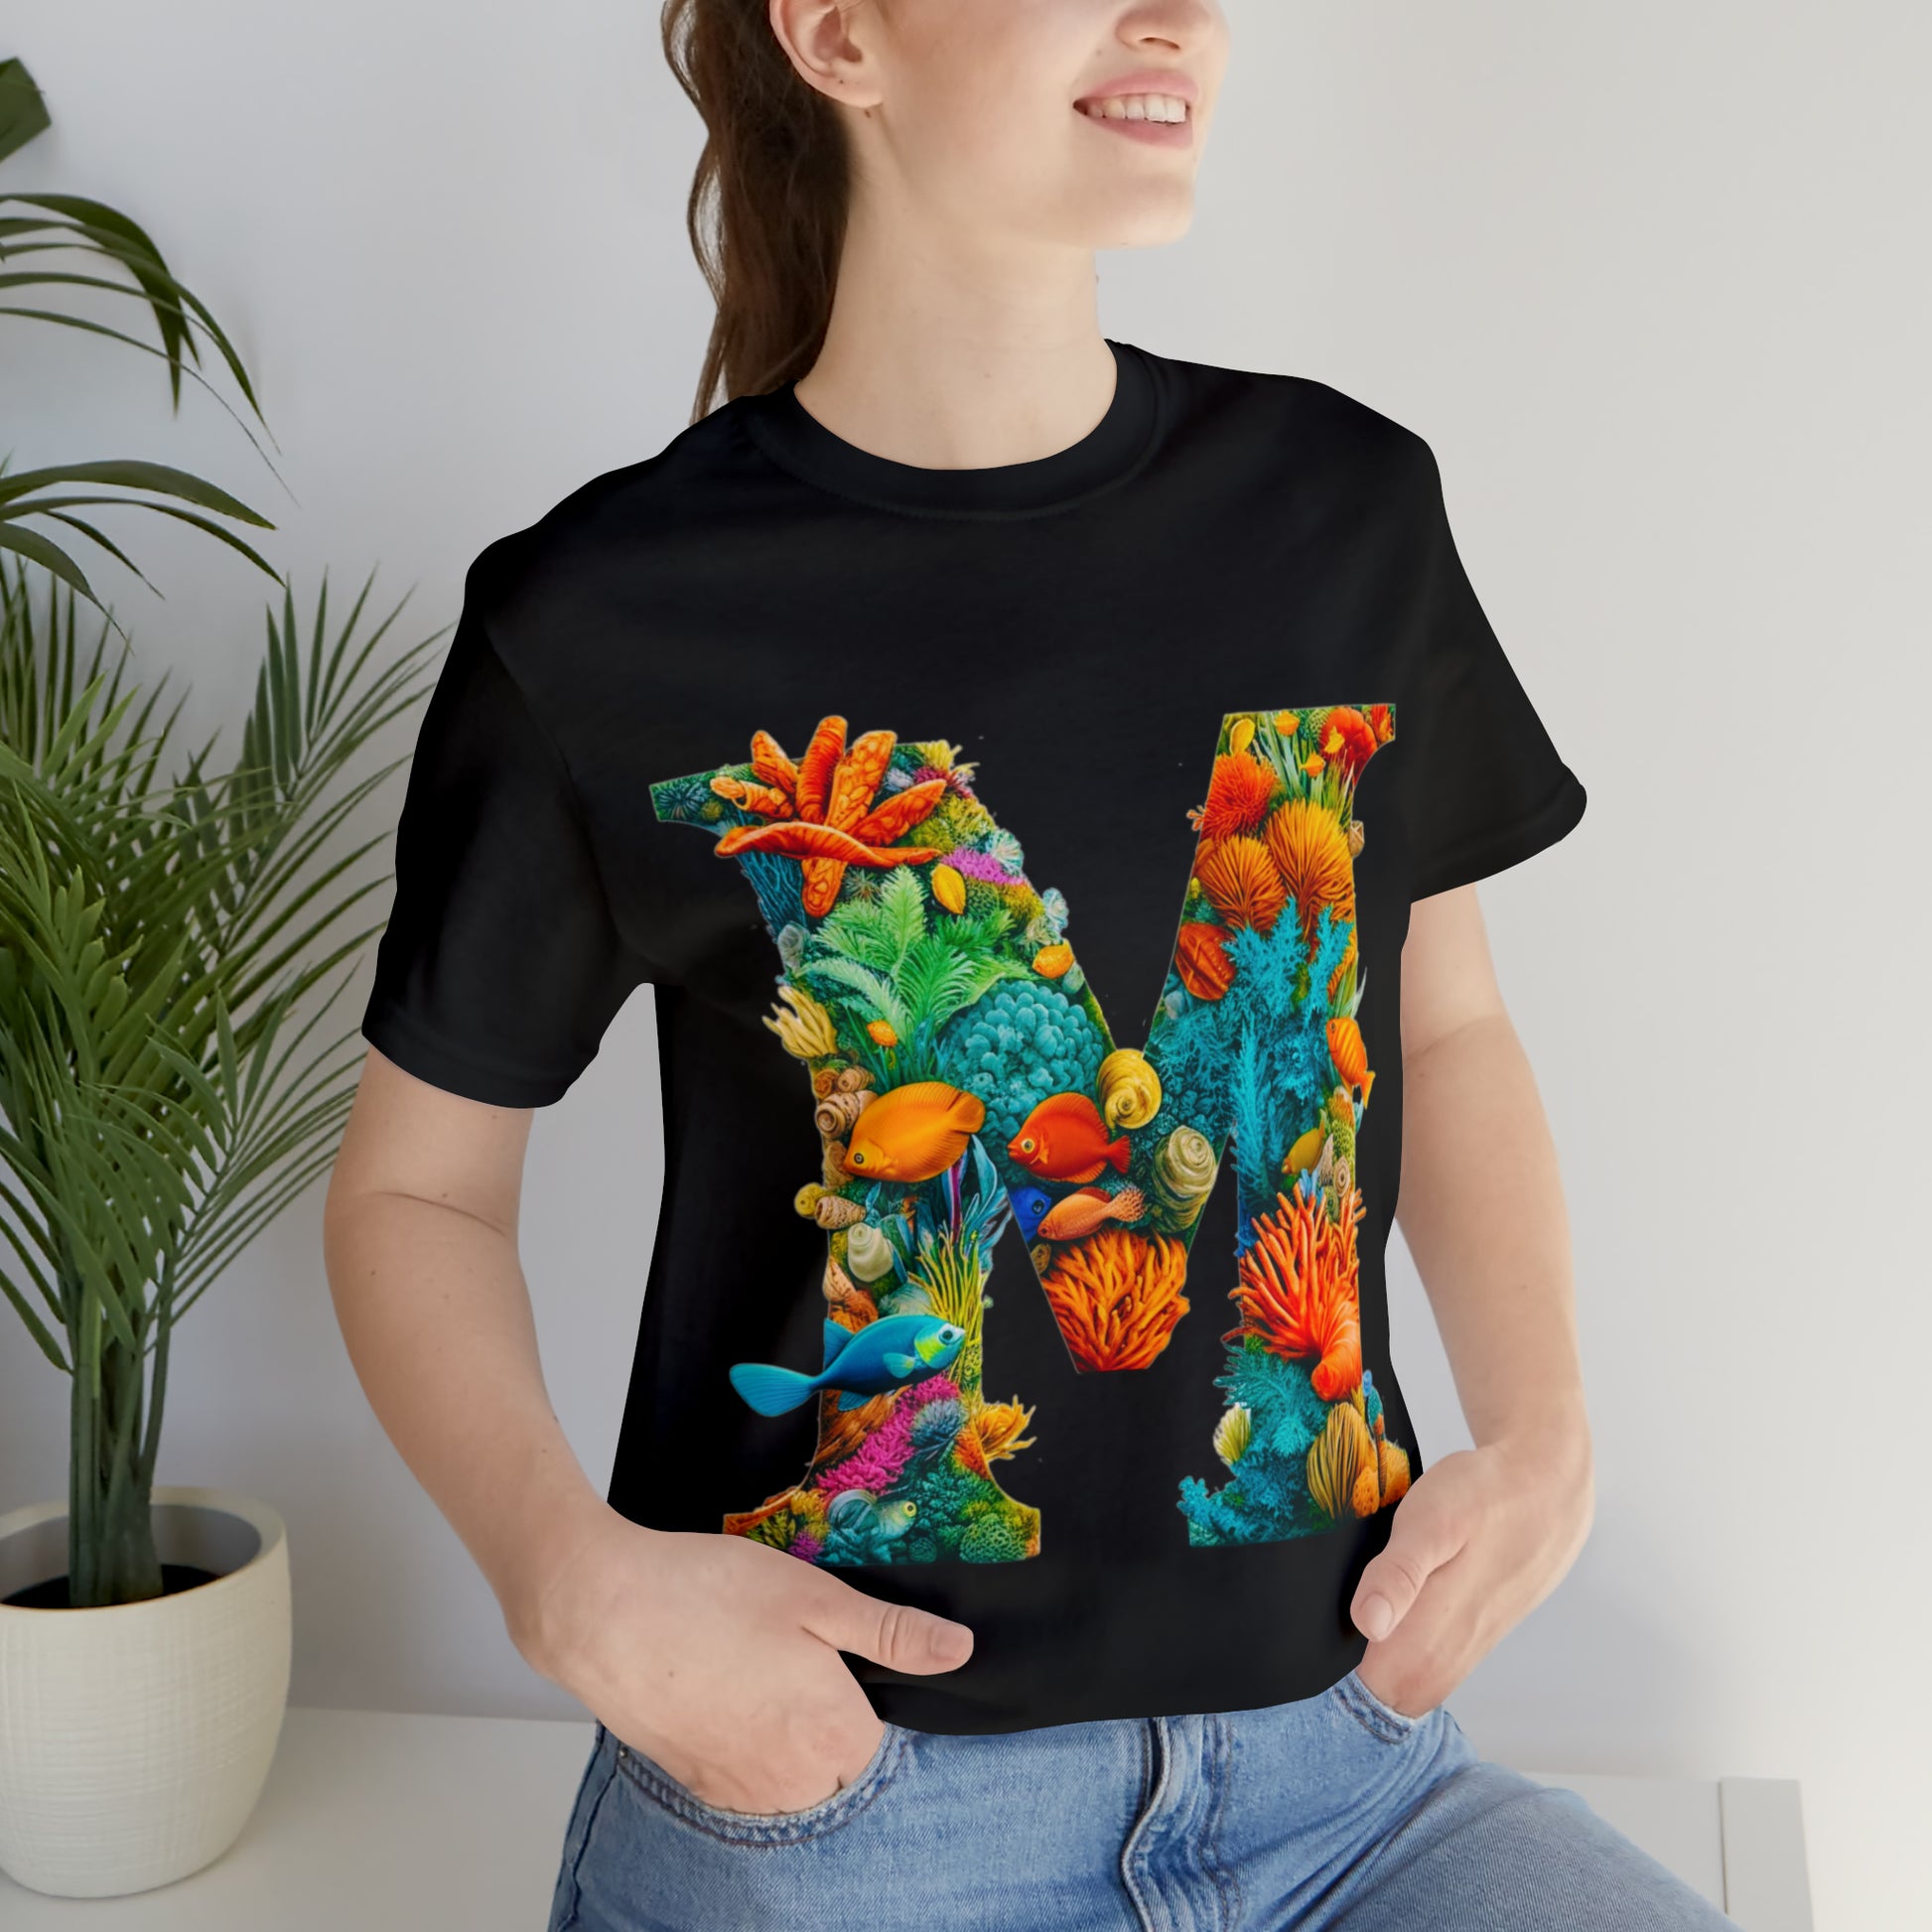 Mermaid Coral Style T-Shirt - Whimsical design inspired by coral reefs, perfect for beach vibes and ocean enthusiasts